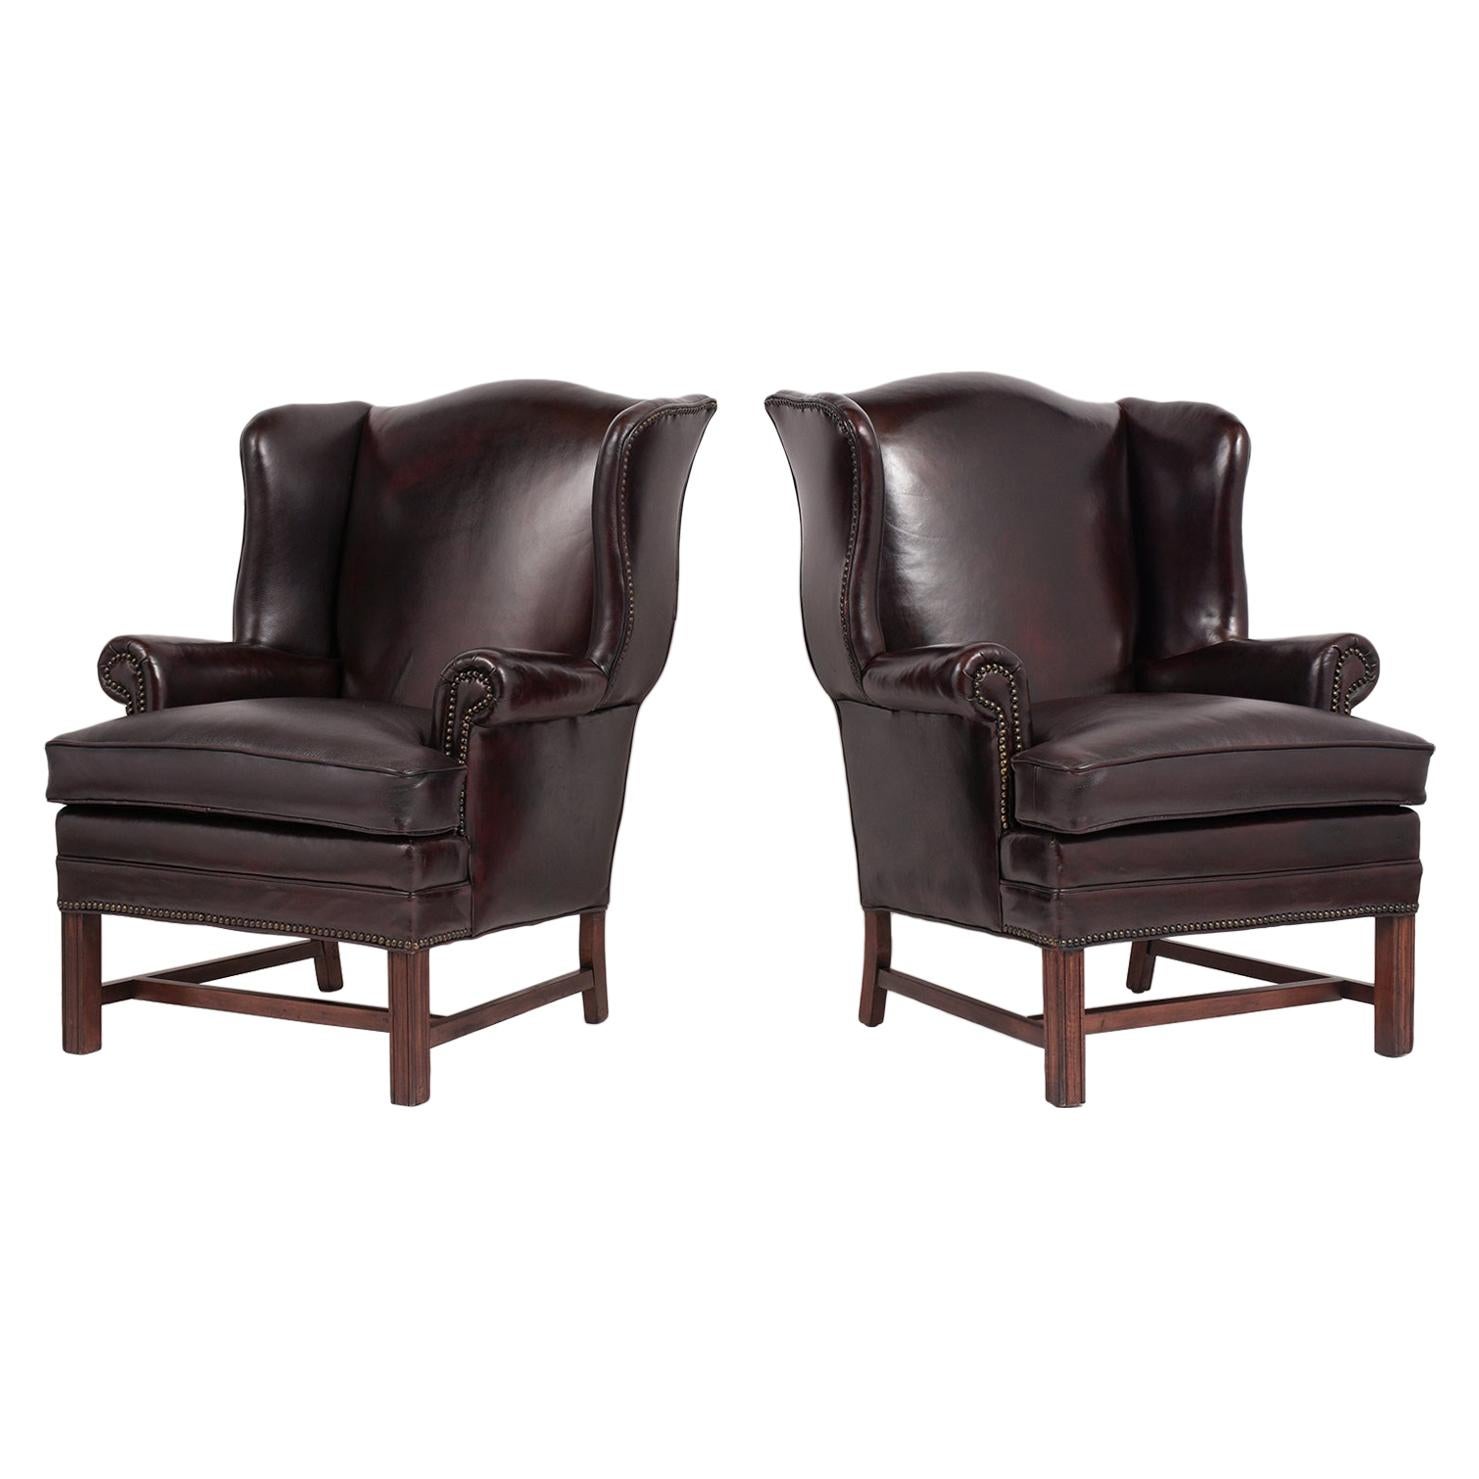 Pair of Leather Wingback Chairs